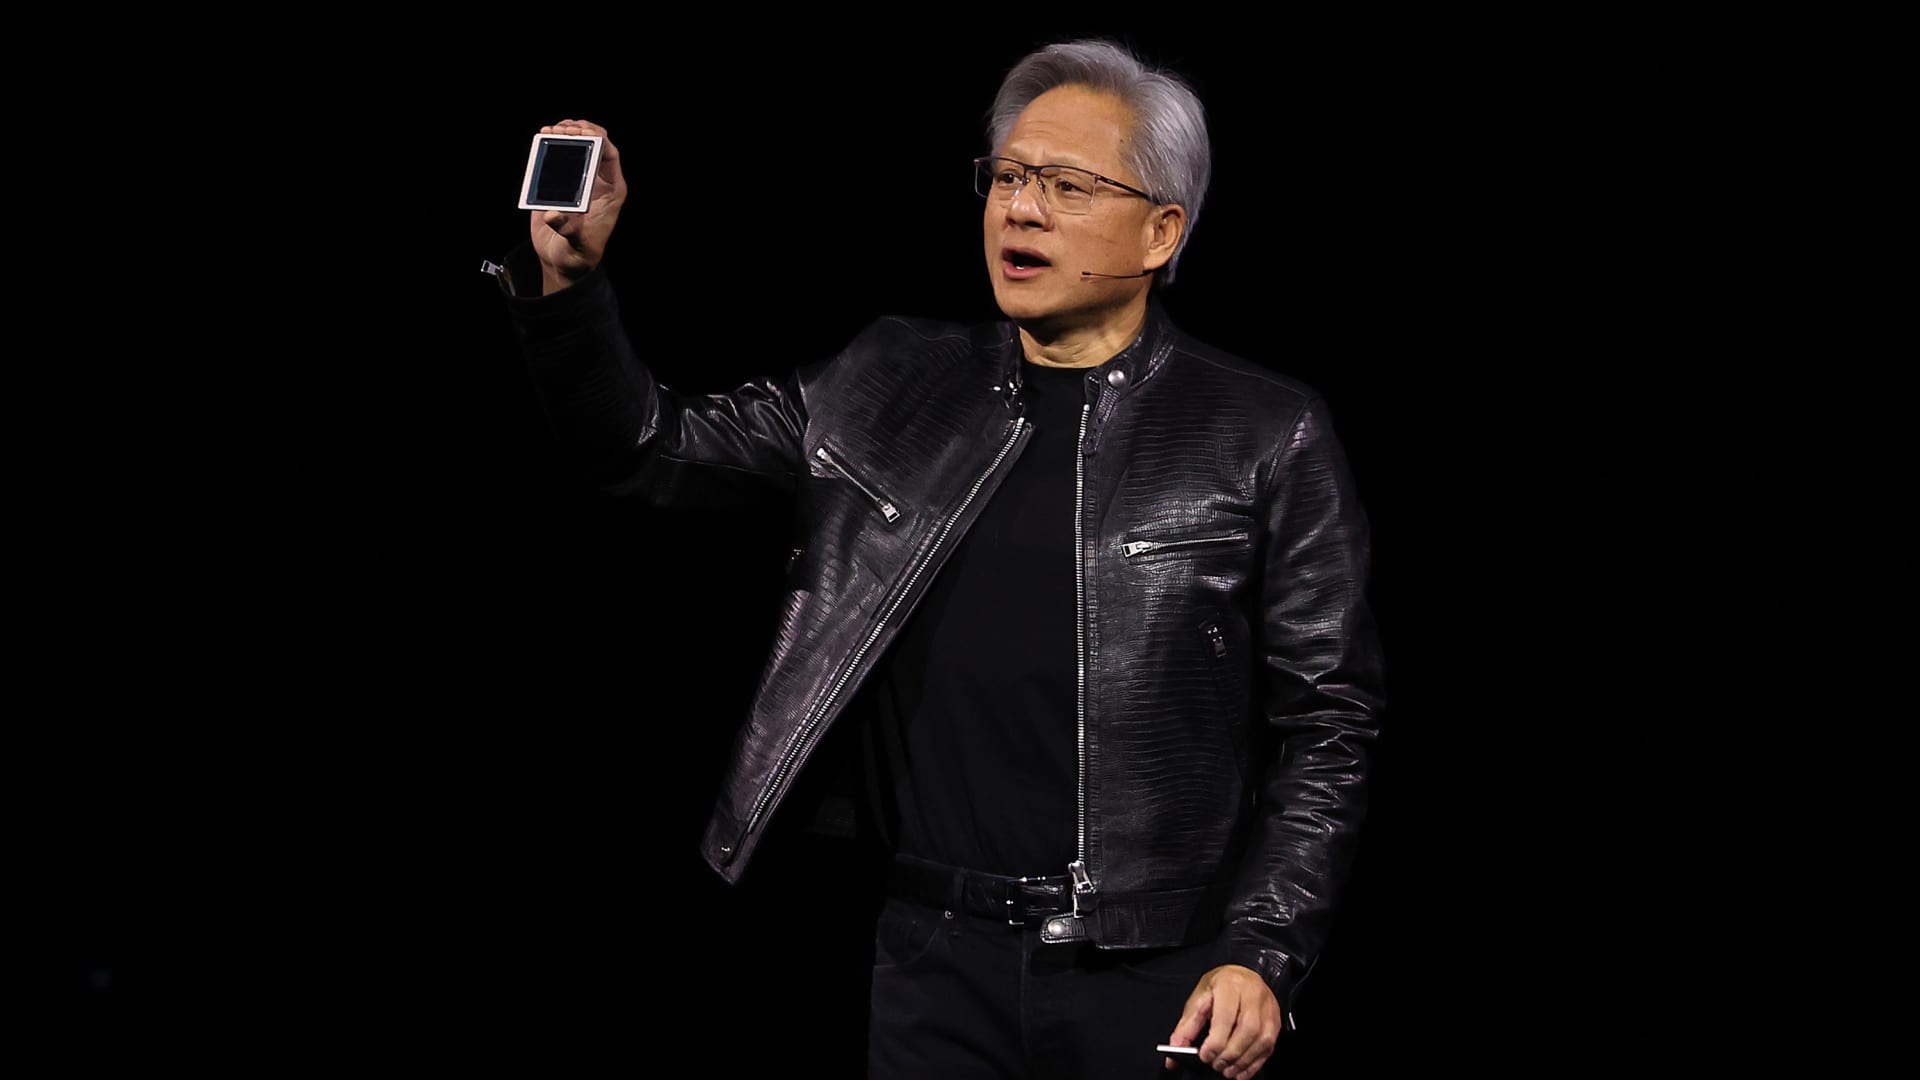 Nvidia CEO built a $3 trillion company with this leadership philosophy: ‘No task is beneath me’